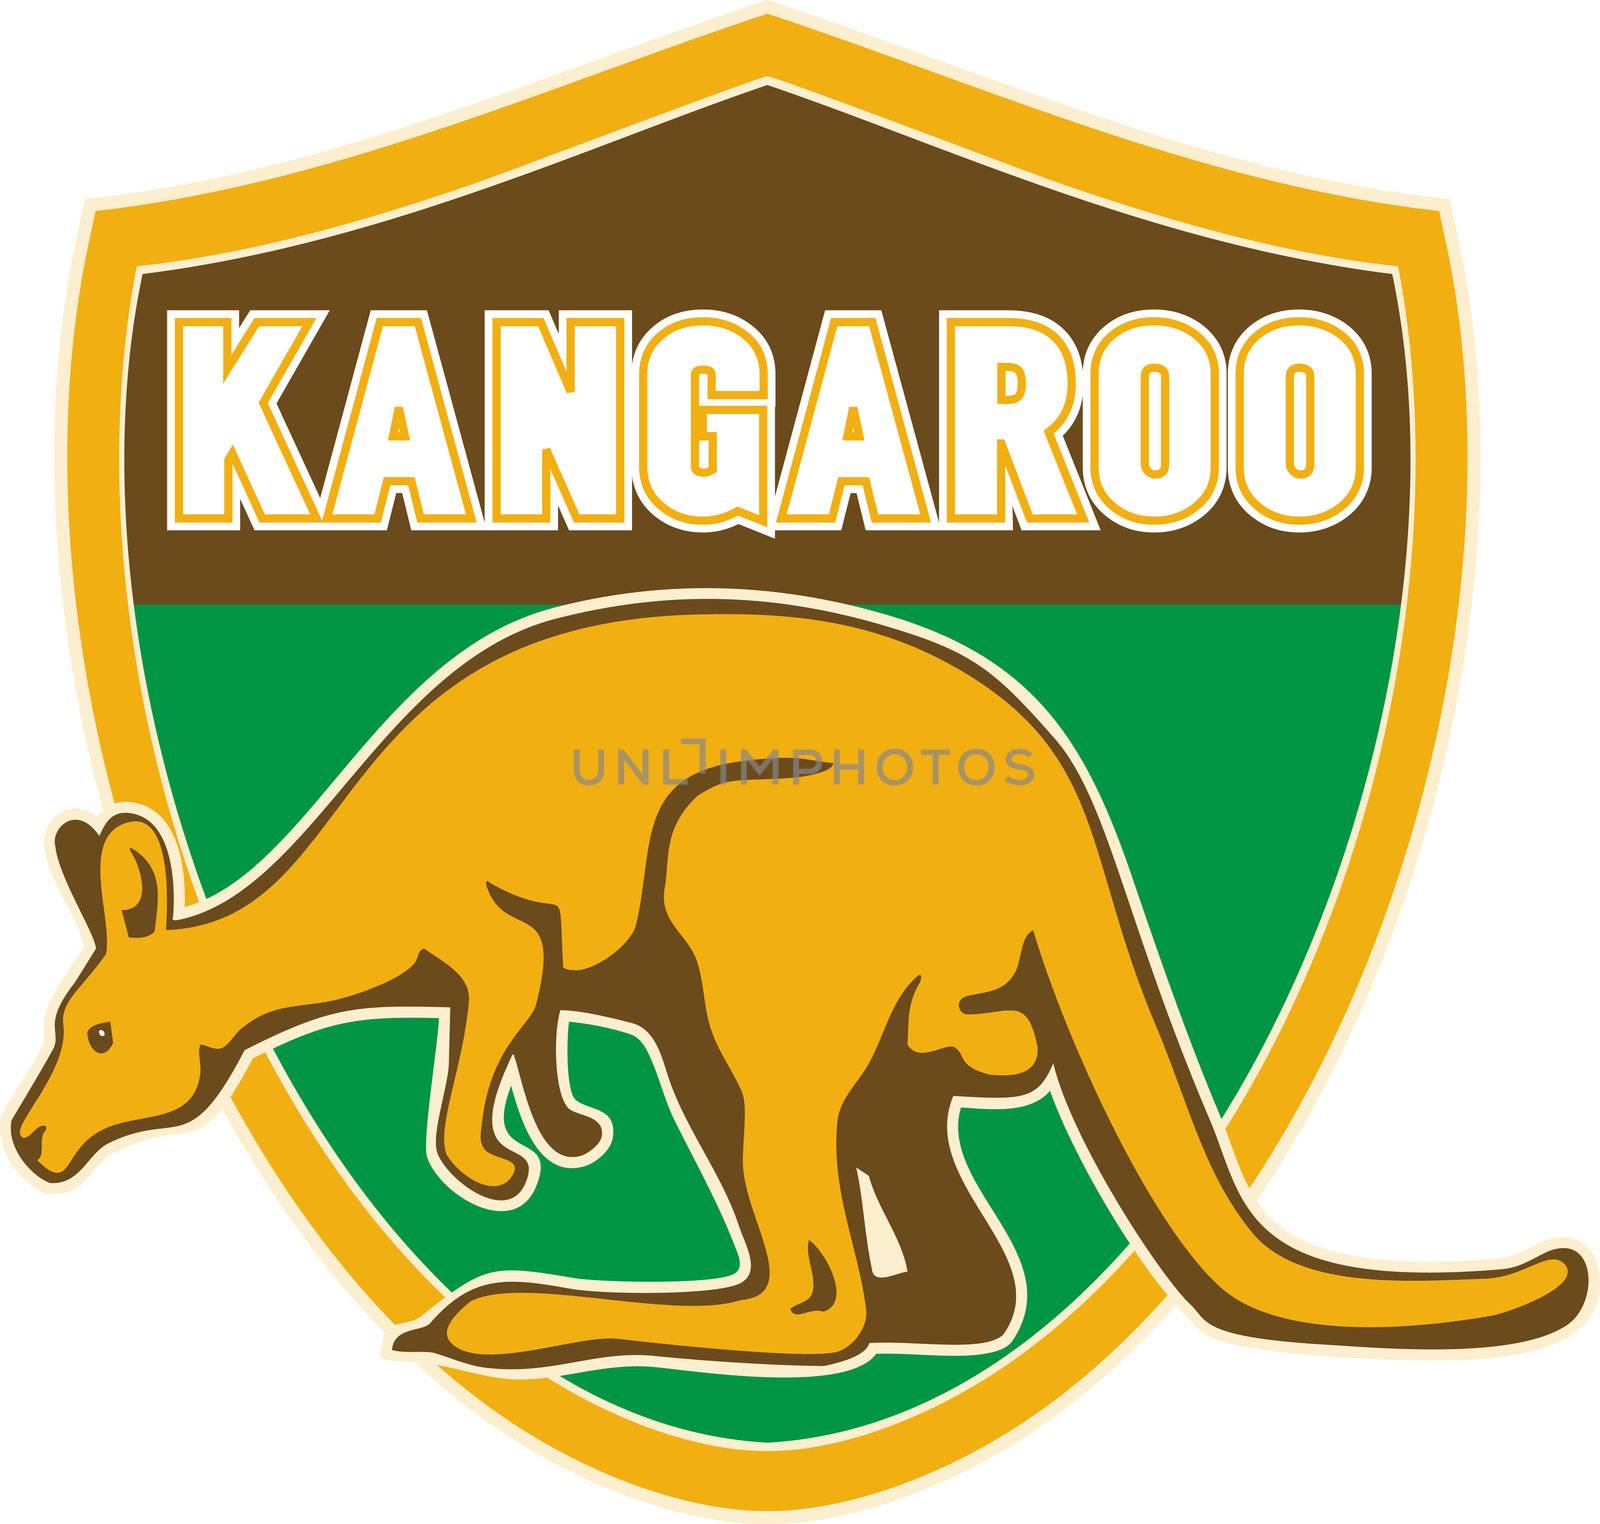 illustration of a kangaroo side view set inside a shield suitable for any sports sporting club team mascot